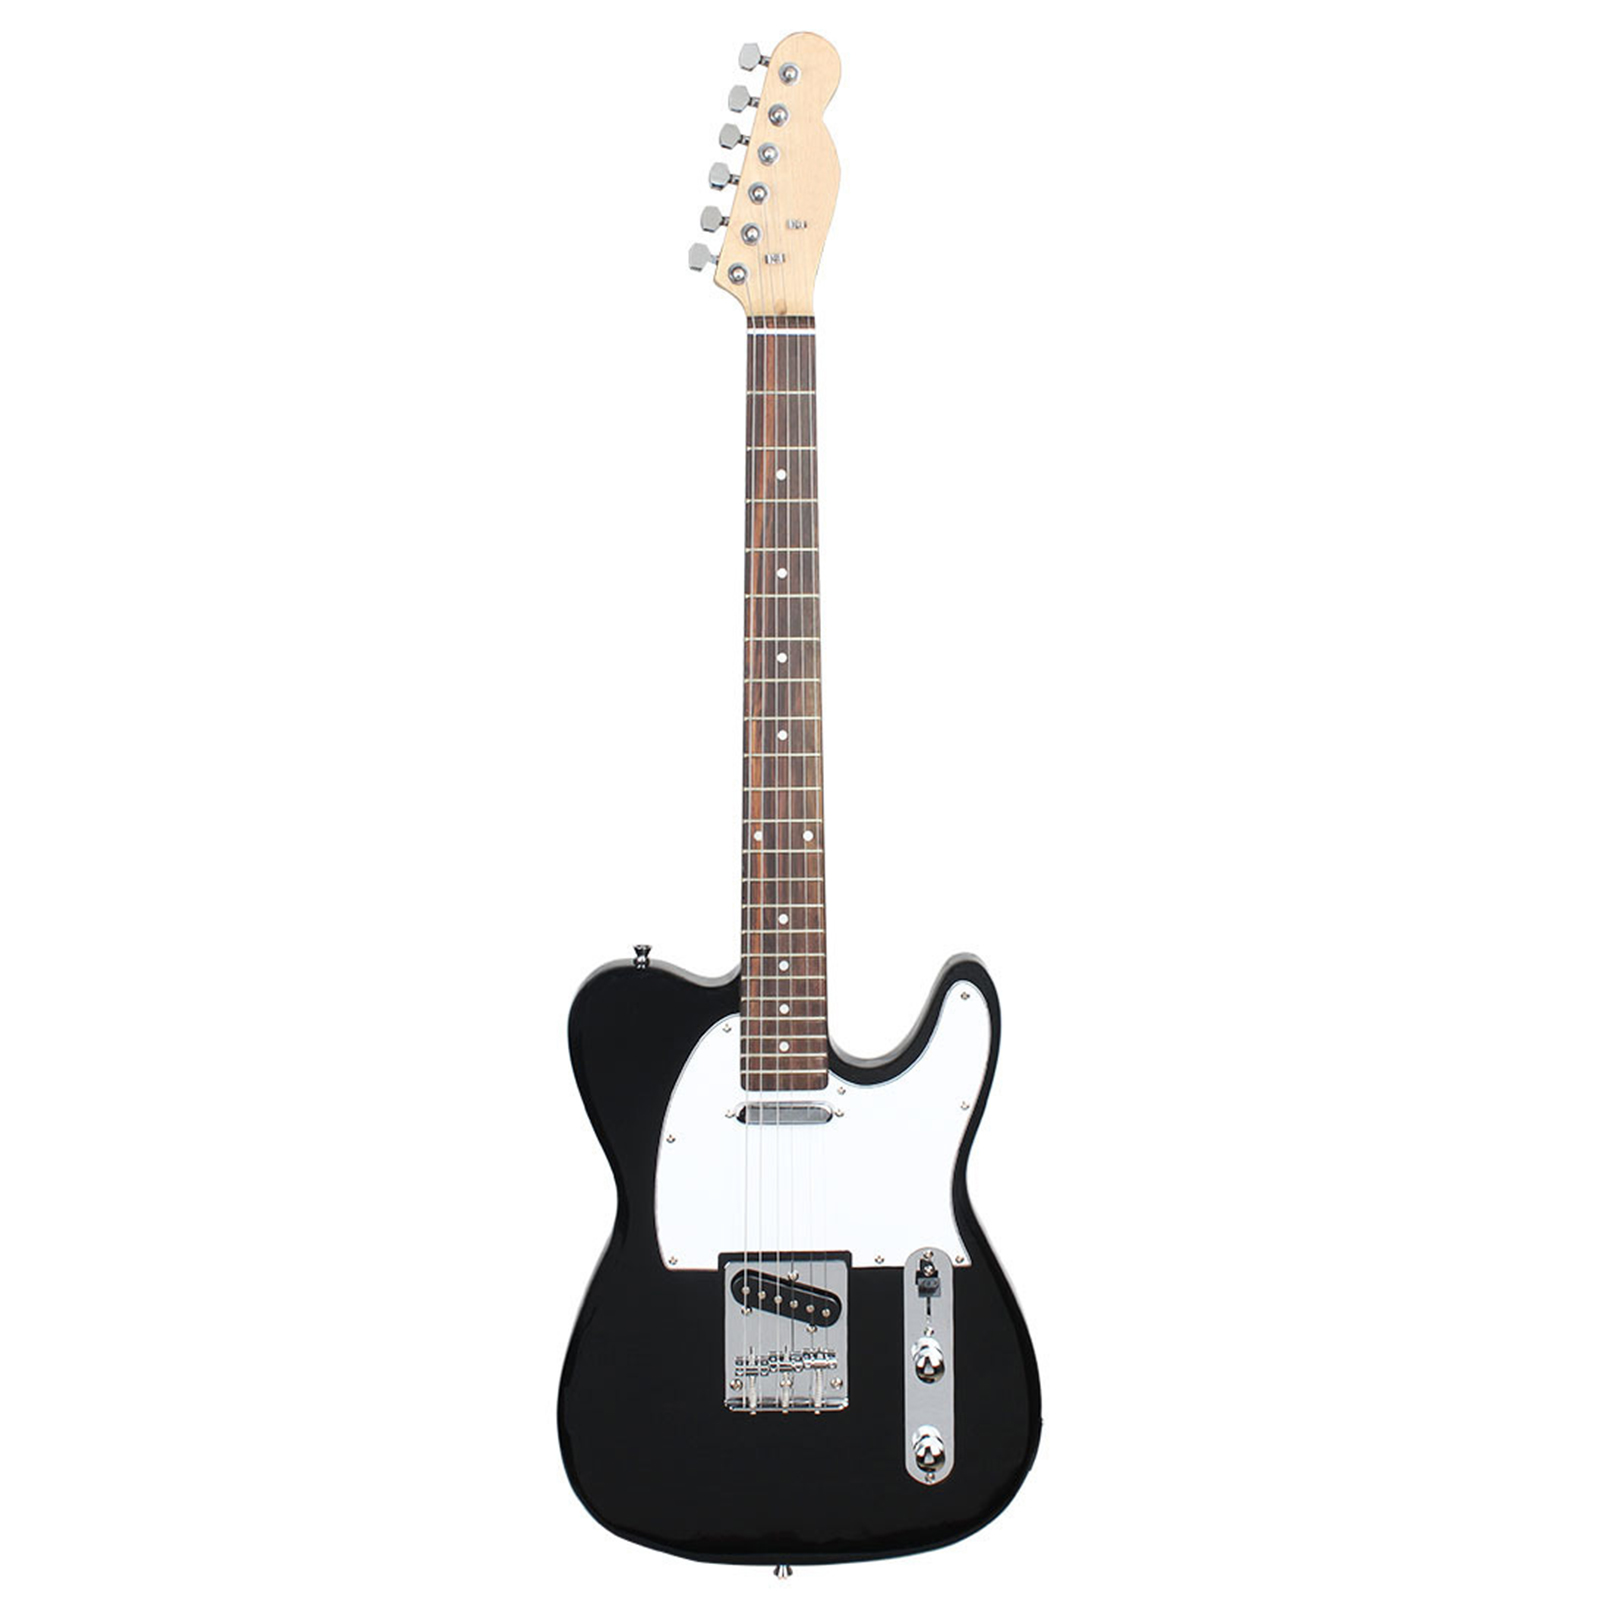 R-160 Series Handmade Electric Guitar With Connection Cable Wrenches Musical Instrument For Beginners